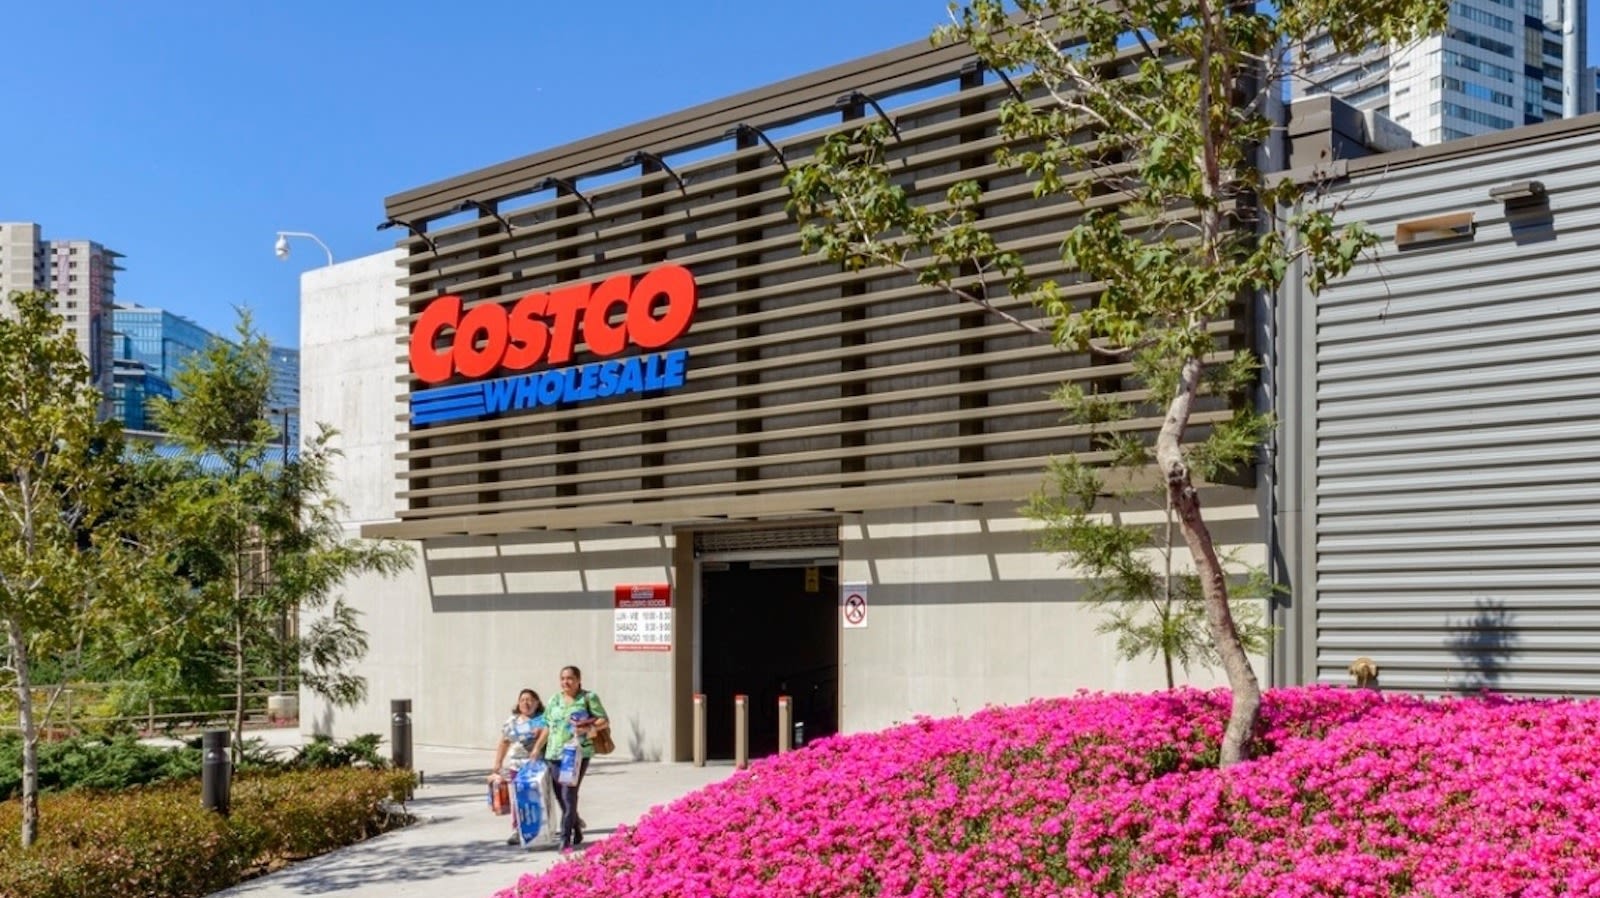 This Unique, Mexico Costco Location Blends In With The Landscape